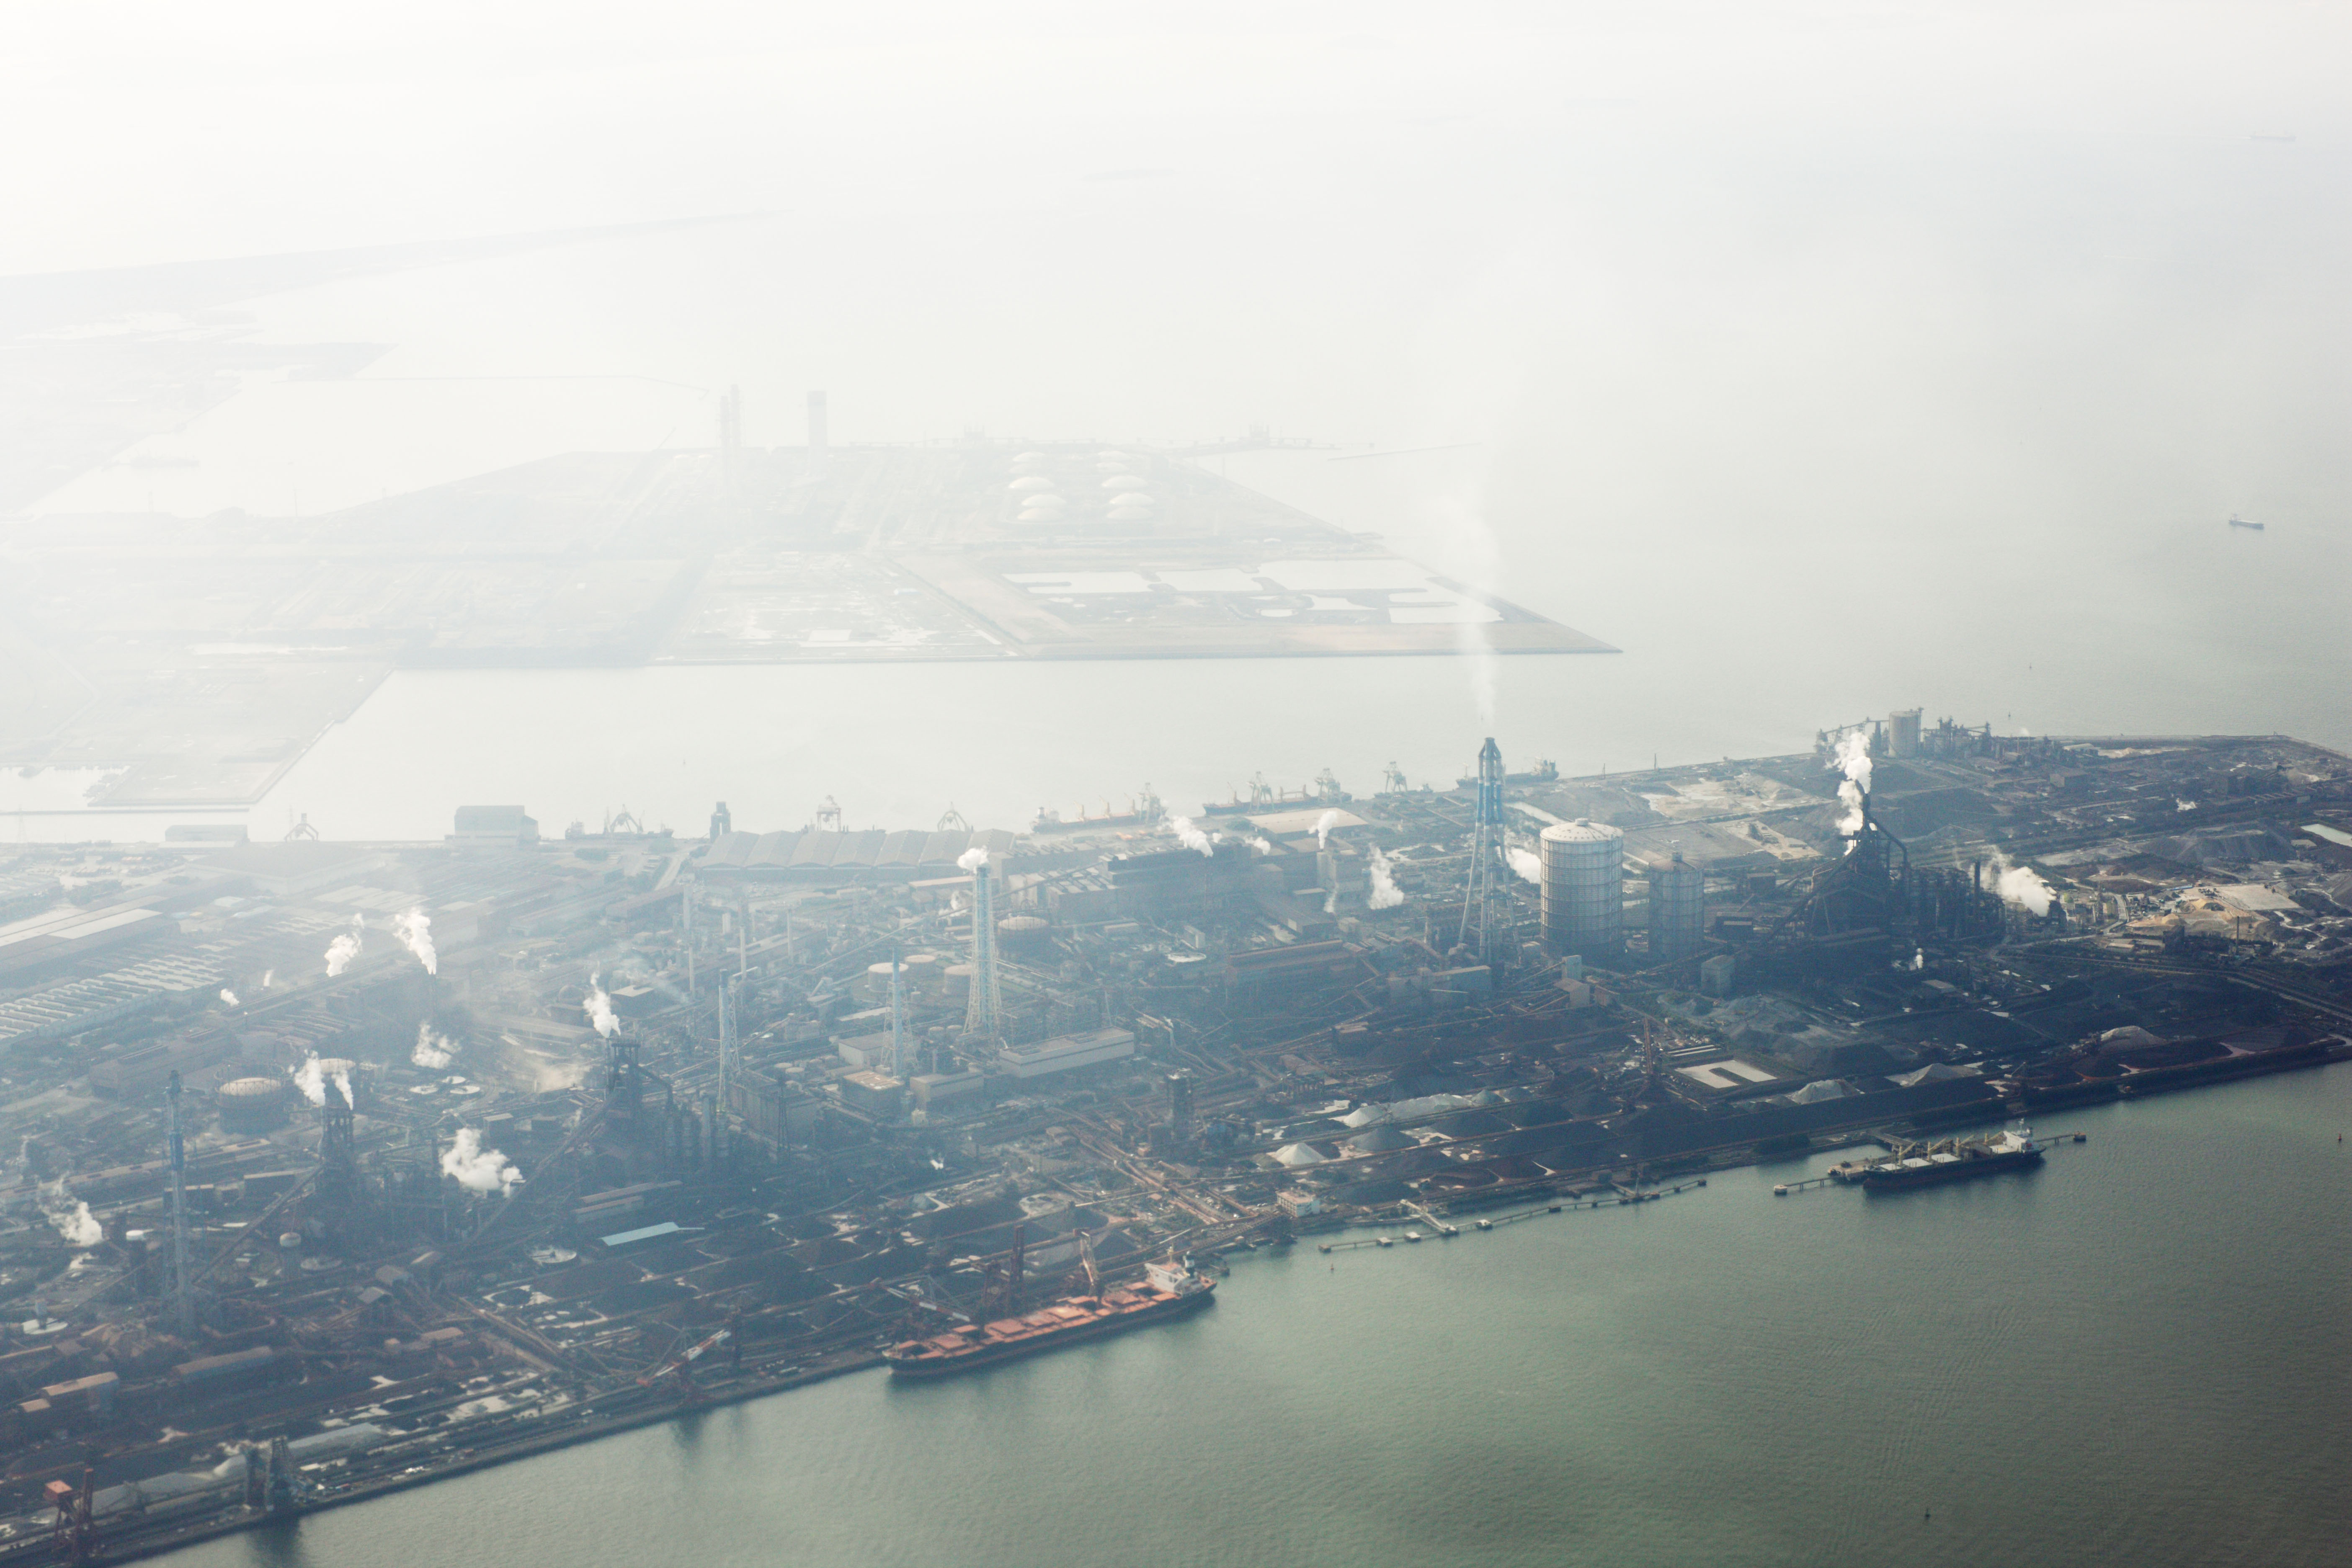 photo,material,free,landscape,picture,stock photo,Creative Commons,Ironworks, Tokyo Bay, Industry, plant, ship